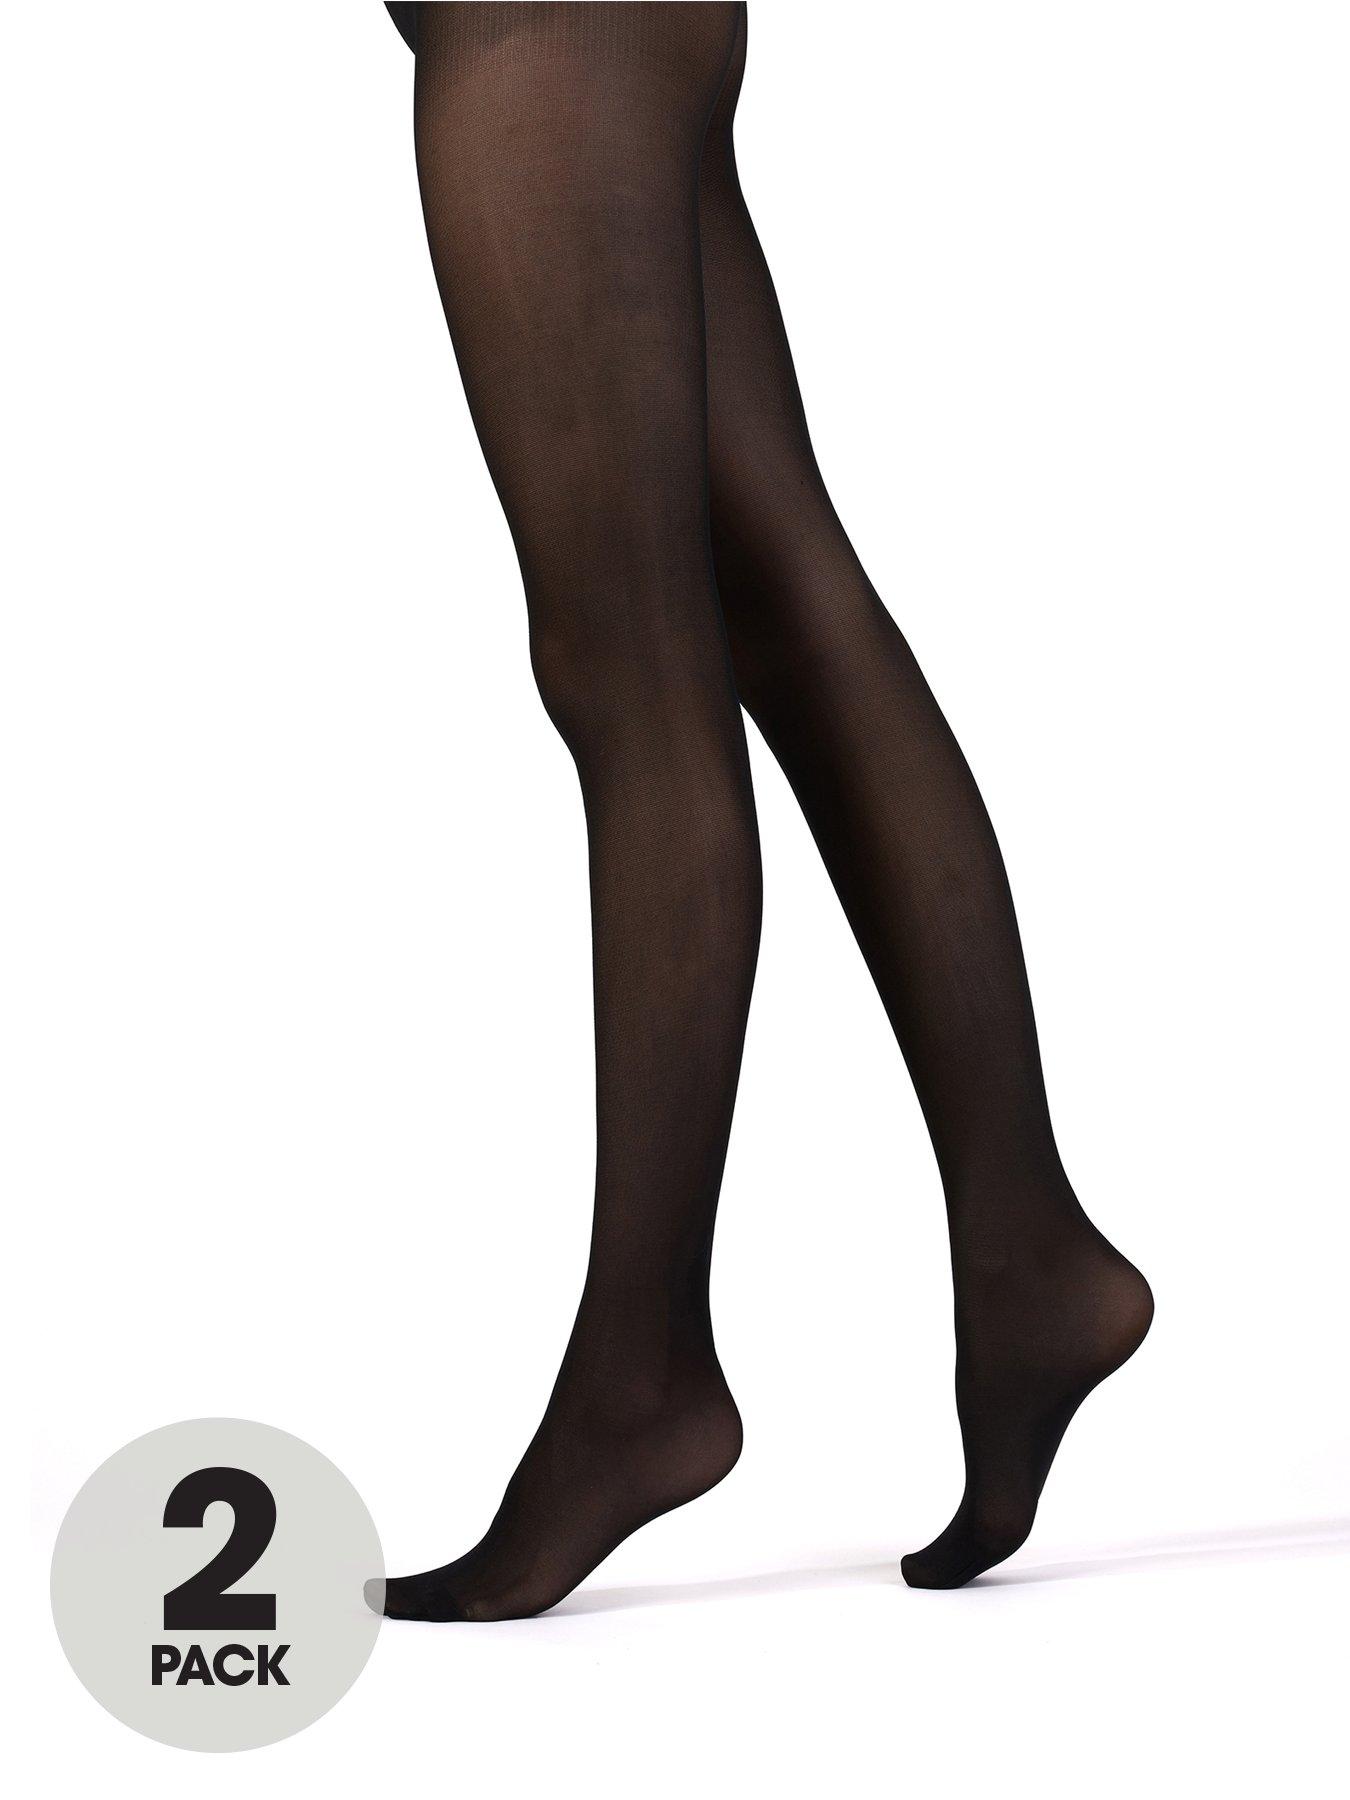 70 DENIER EXTRA STRONG OPAQUE TIGHTS FOR GIRLS